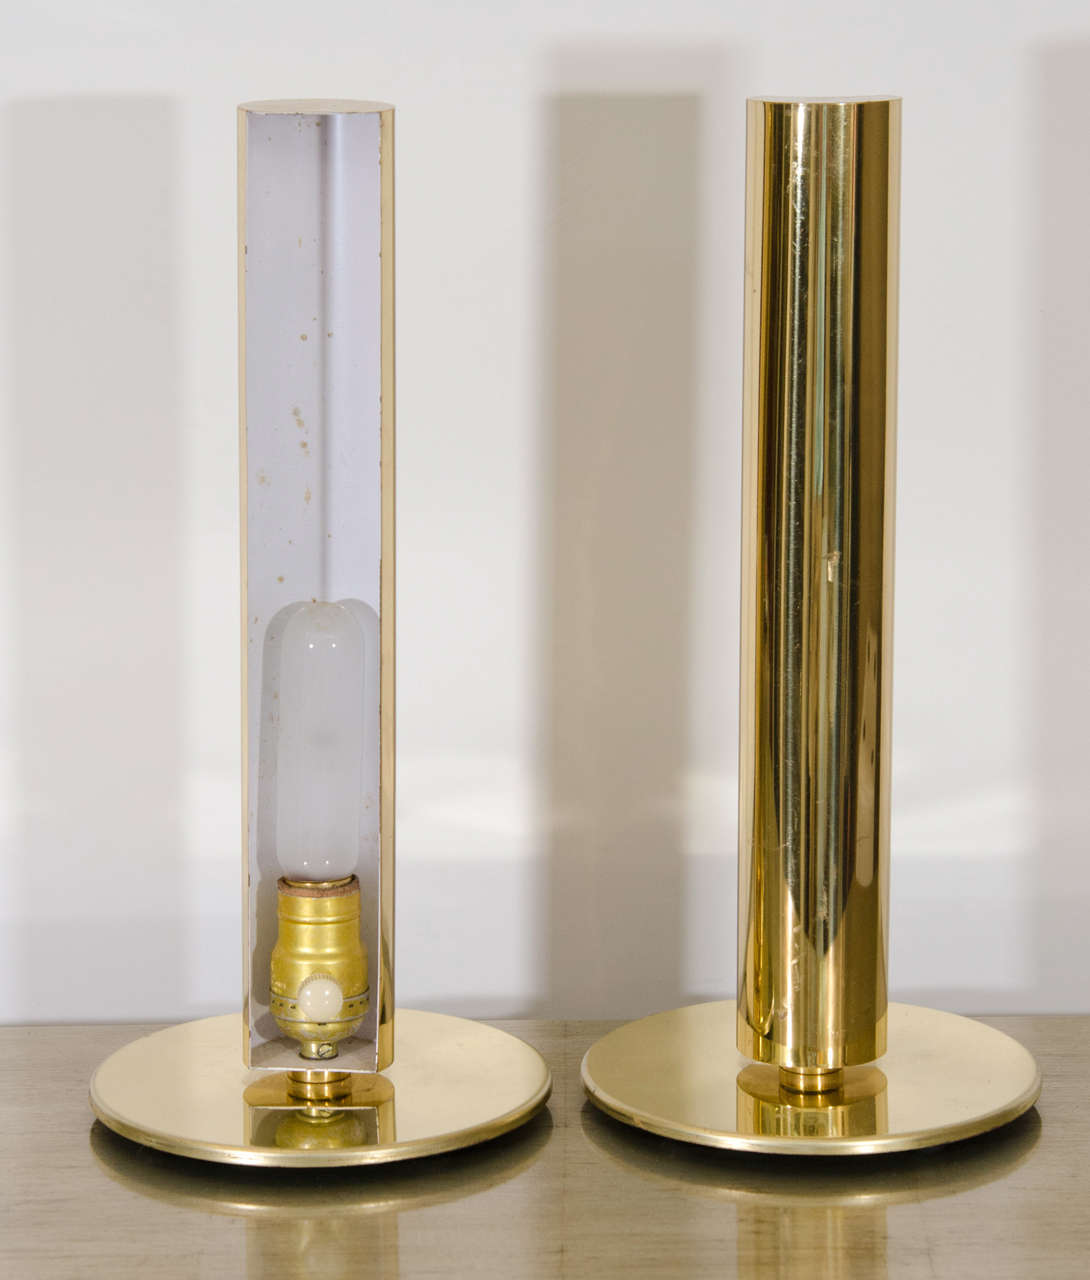 A vintage pair of brass cylinder lamps by Kovacs with label.

Reduced from: $3,200.